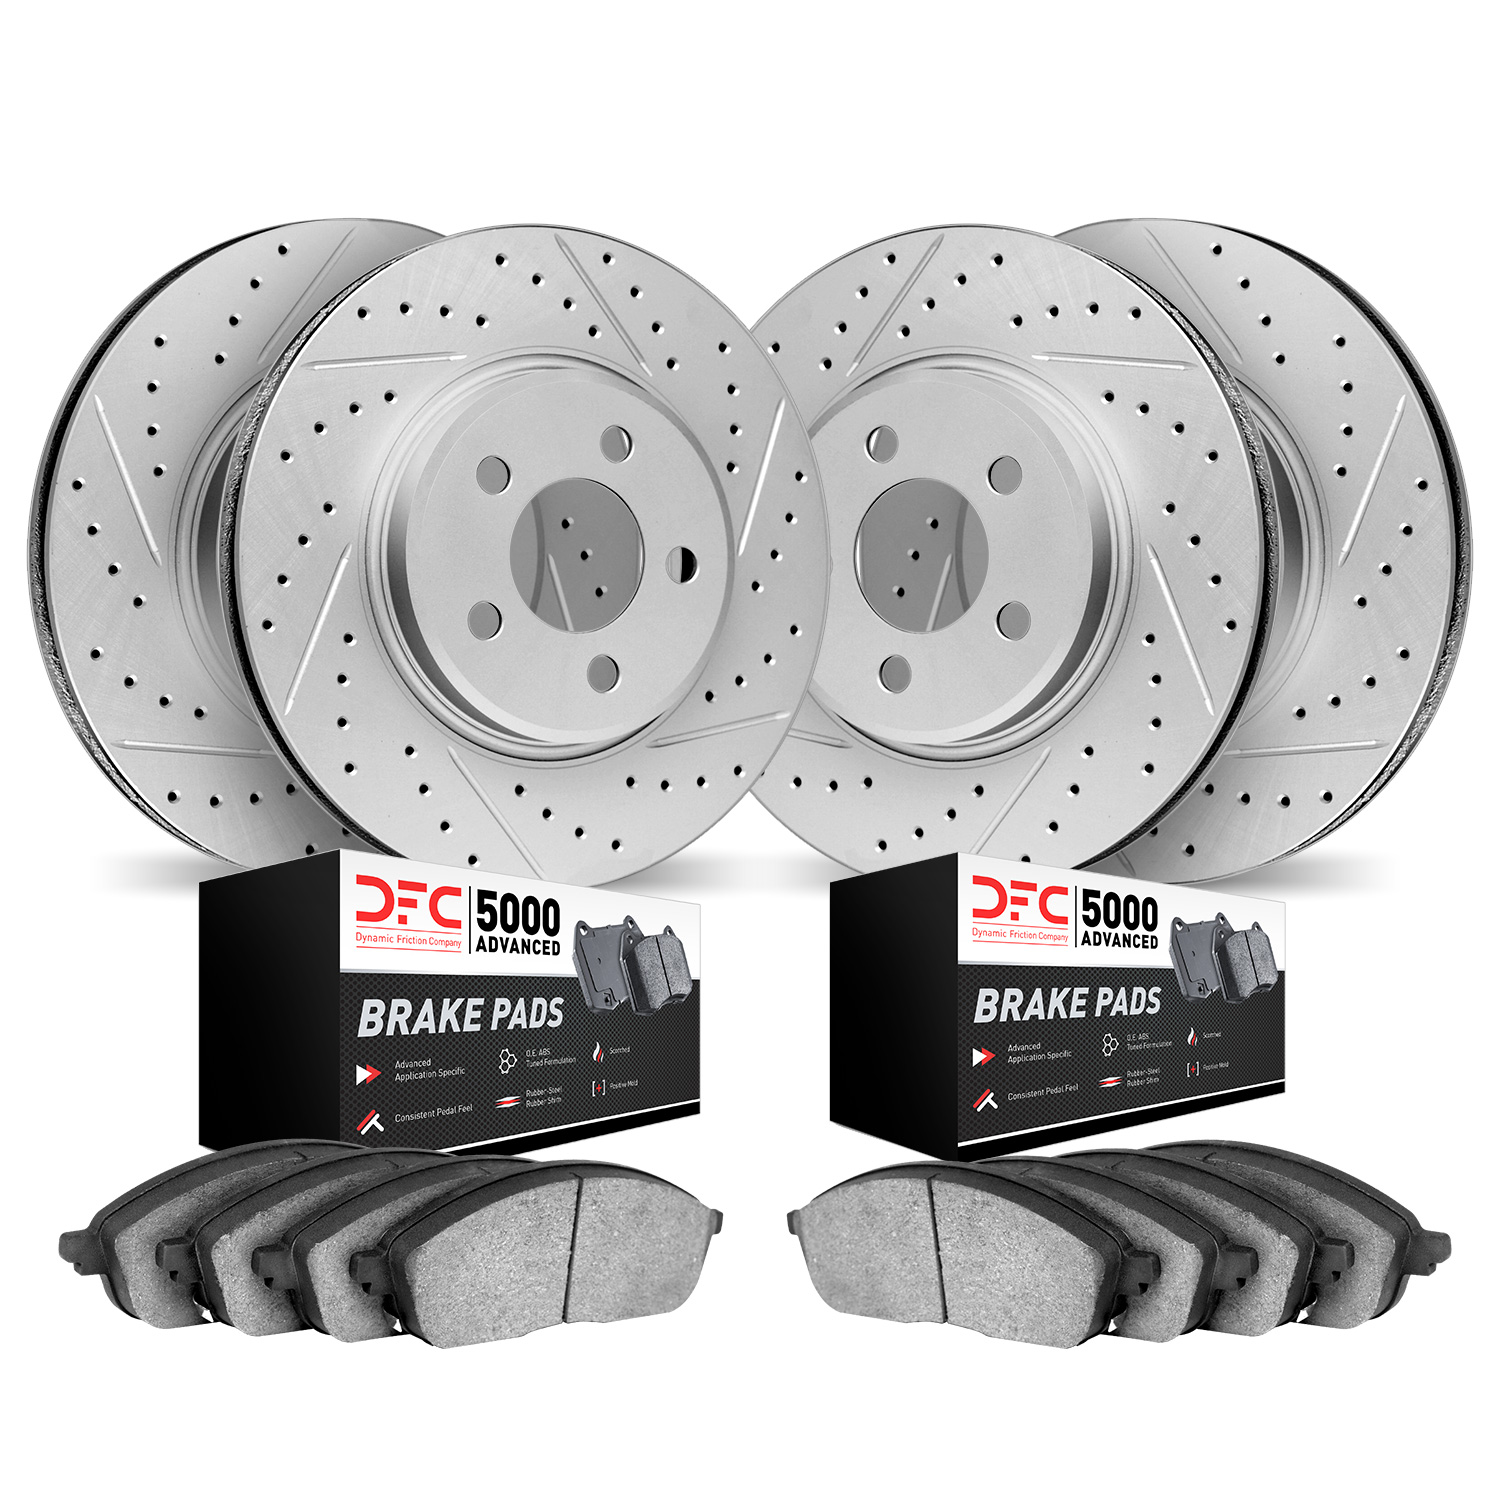 2504-13020 Geoperformance Drilled/Slotted Rotors w/5000 Advanced Brake Pads Kit, Fits Select Subaru, Position: Front and Rear